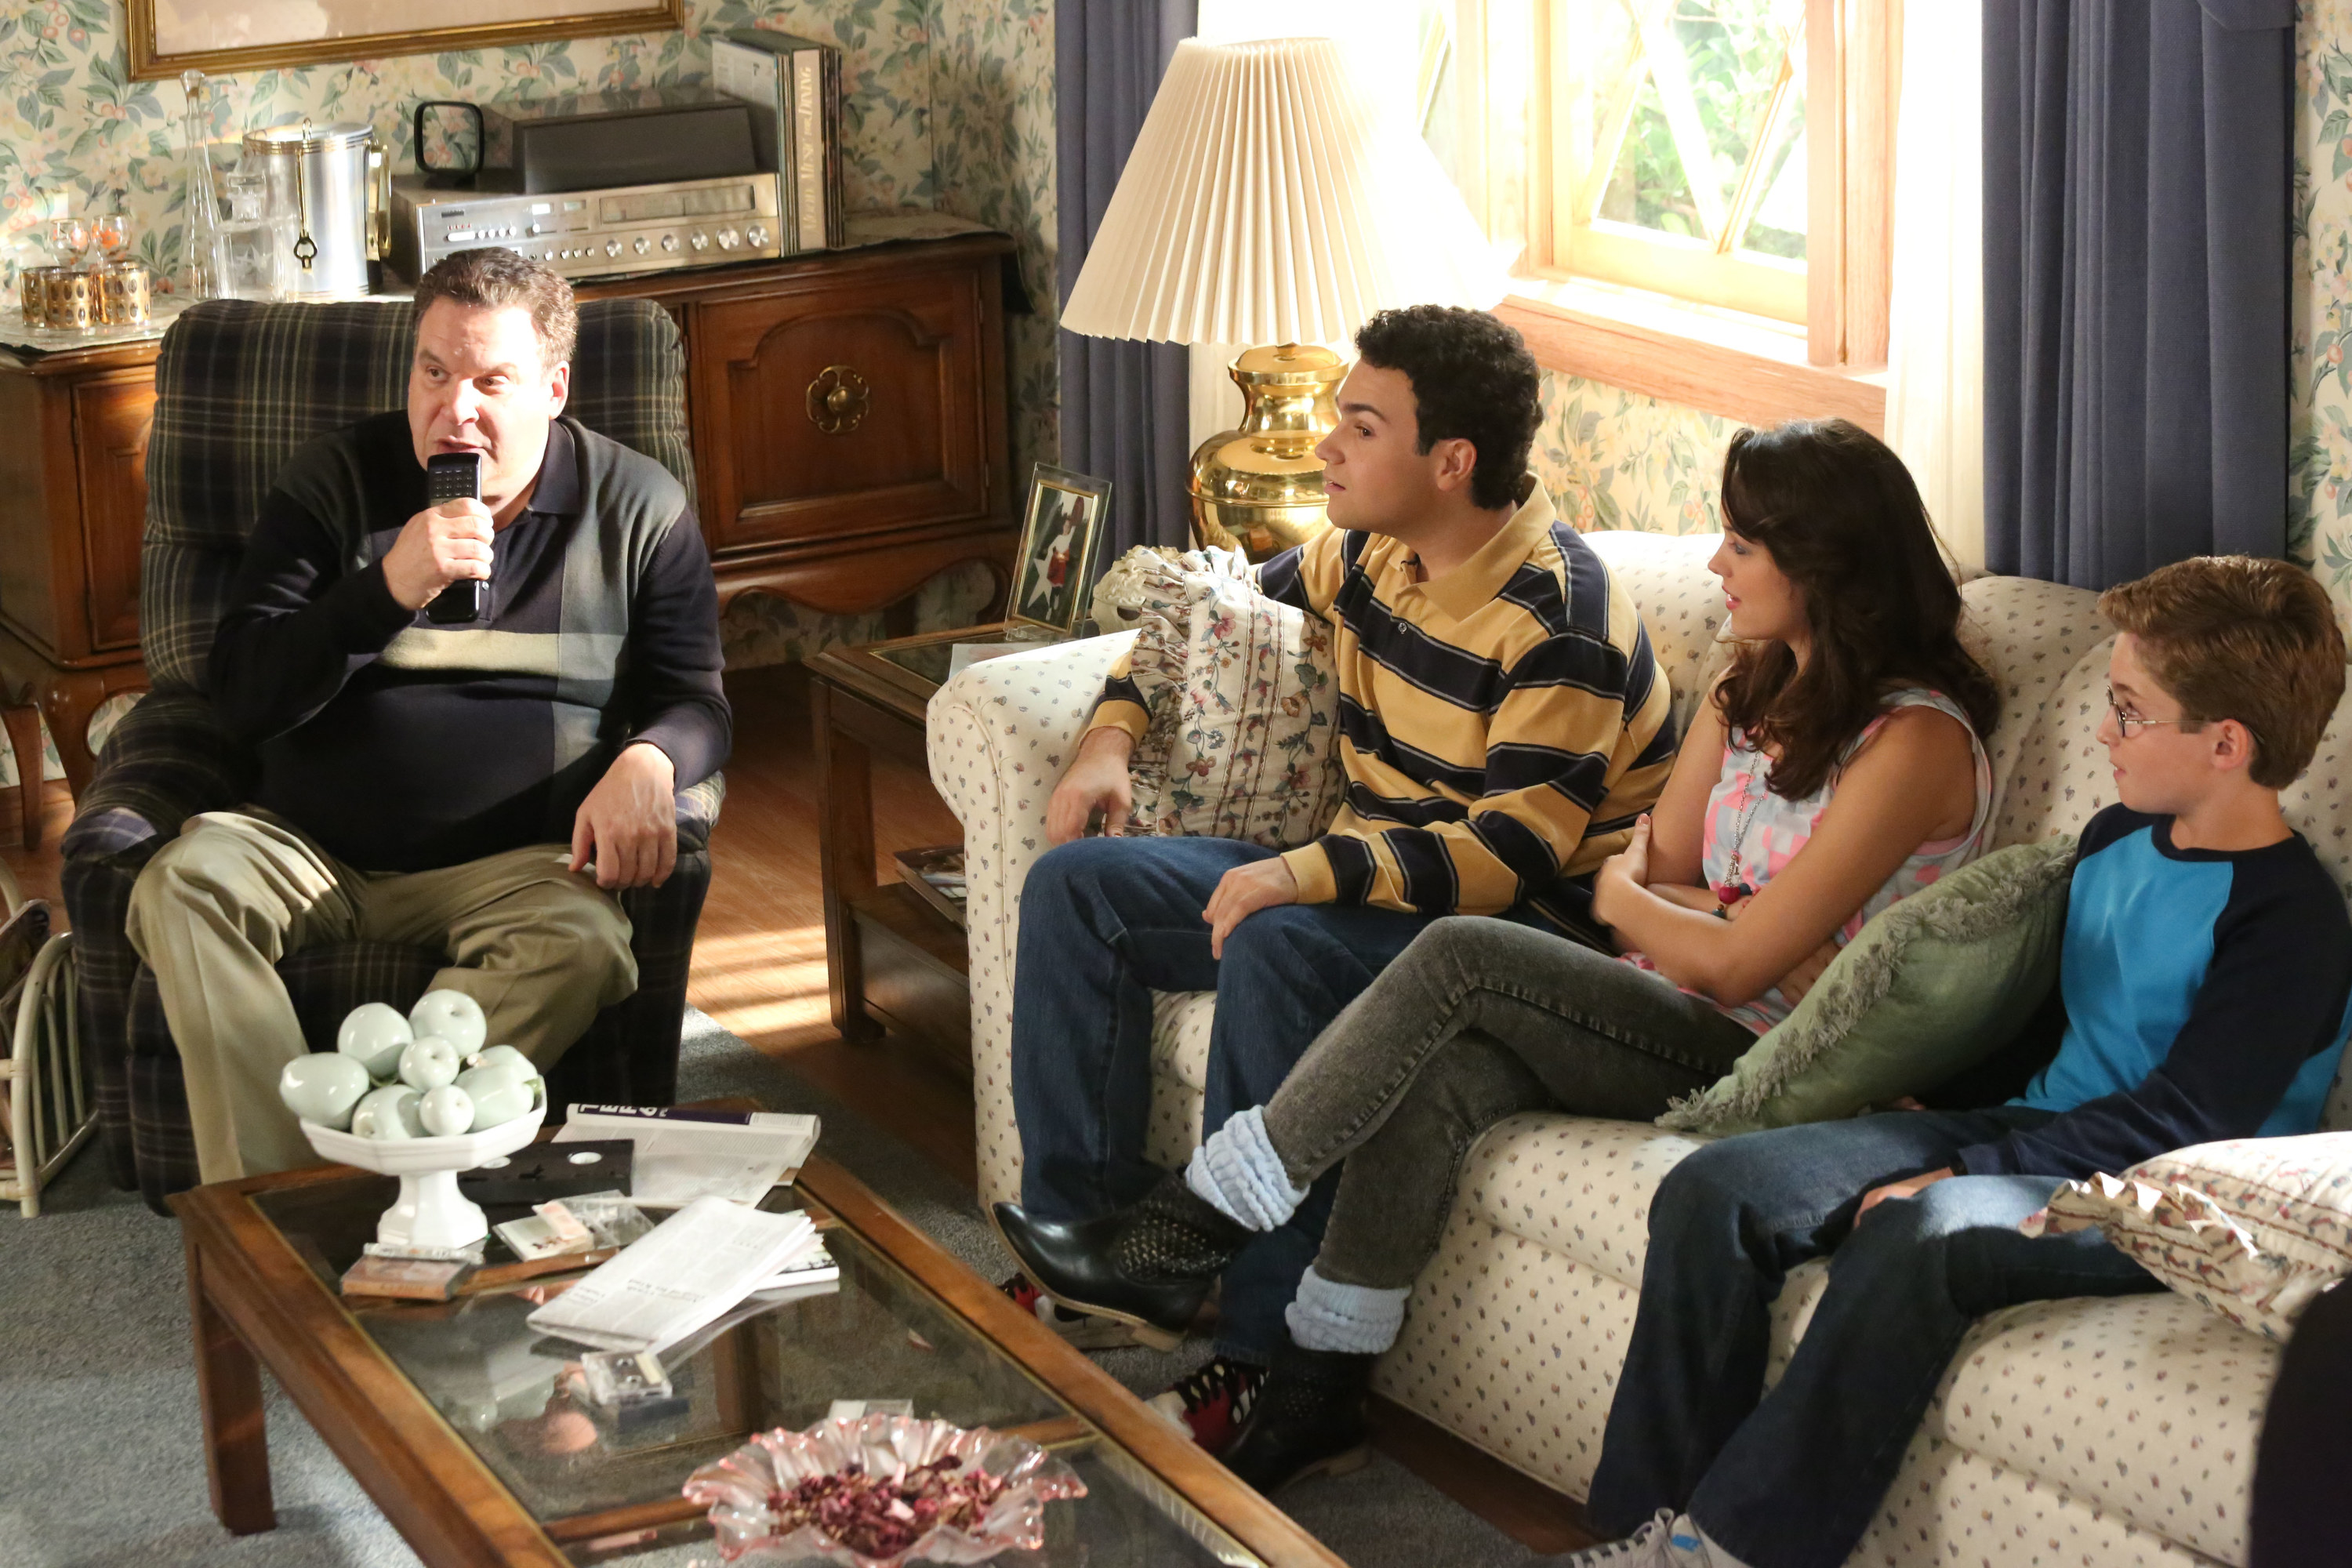 Garlin puts a remote control to his chin as he sits in a living room with his kids in a scene from the show